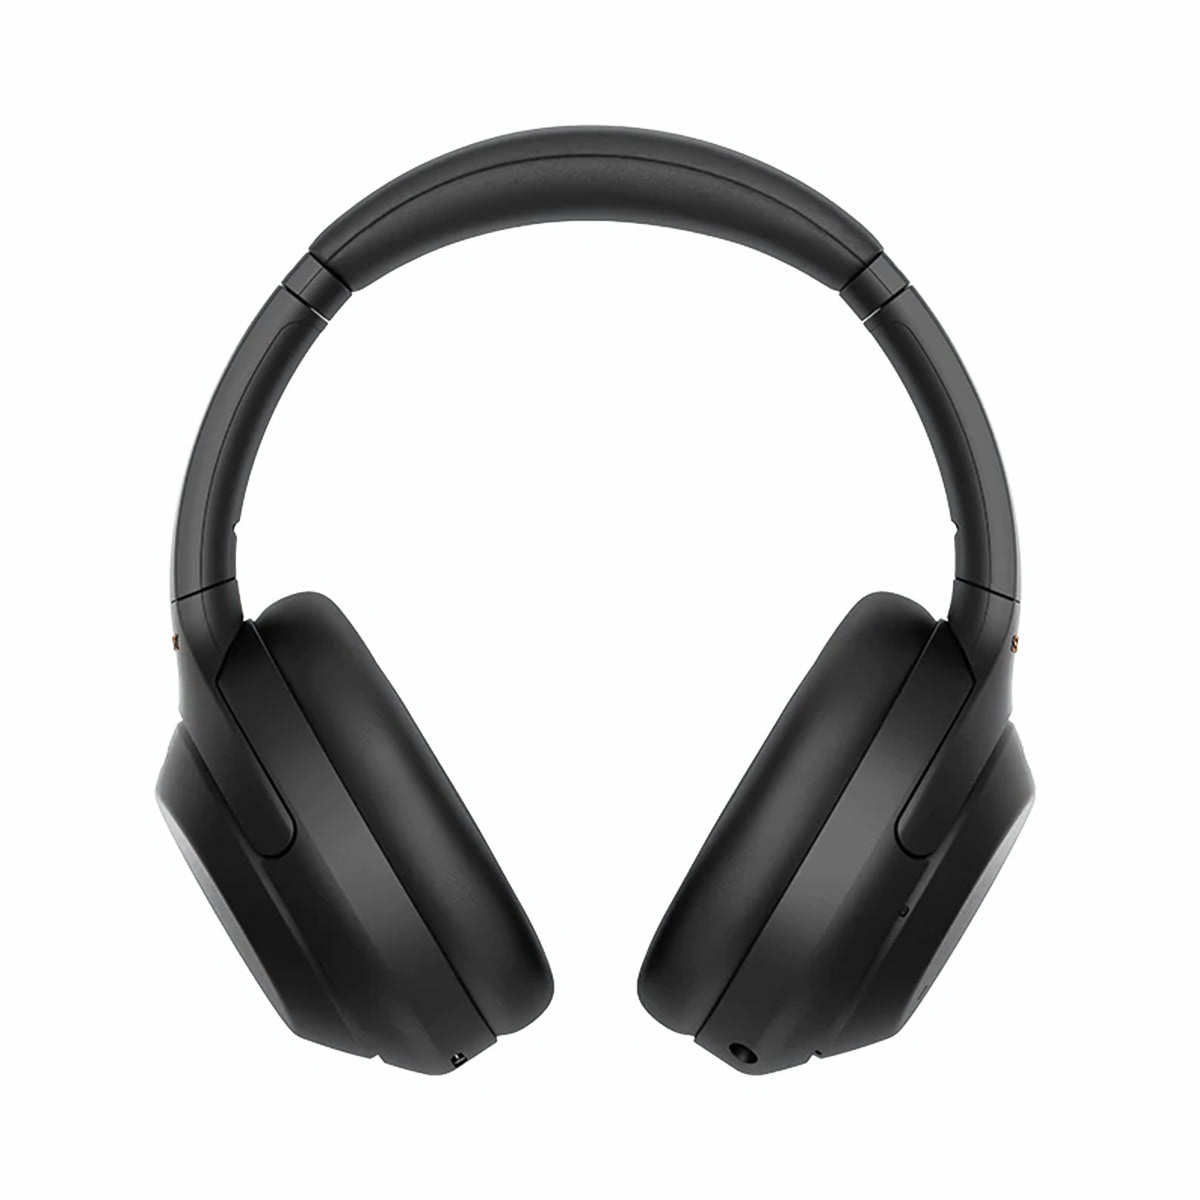 Sony WH-1000XM4 Wireless Noise Canceling Over-the-Ear Headphones with Google Assistant - Black - image 3 of 11